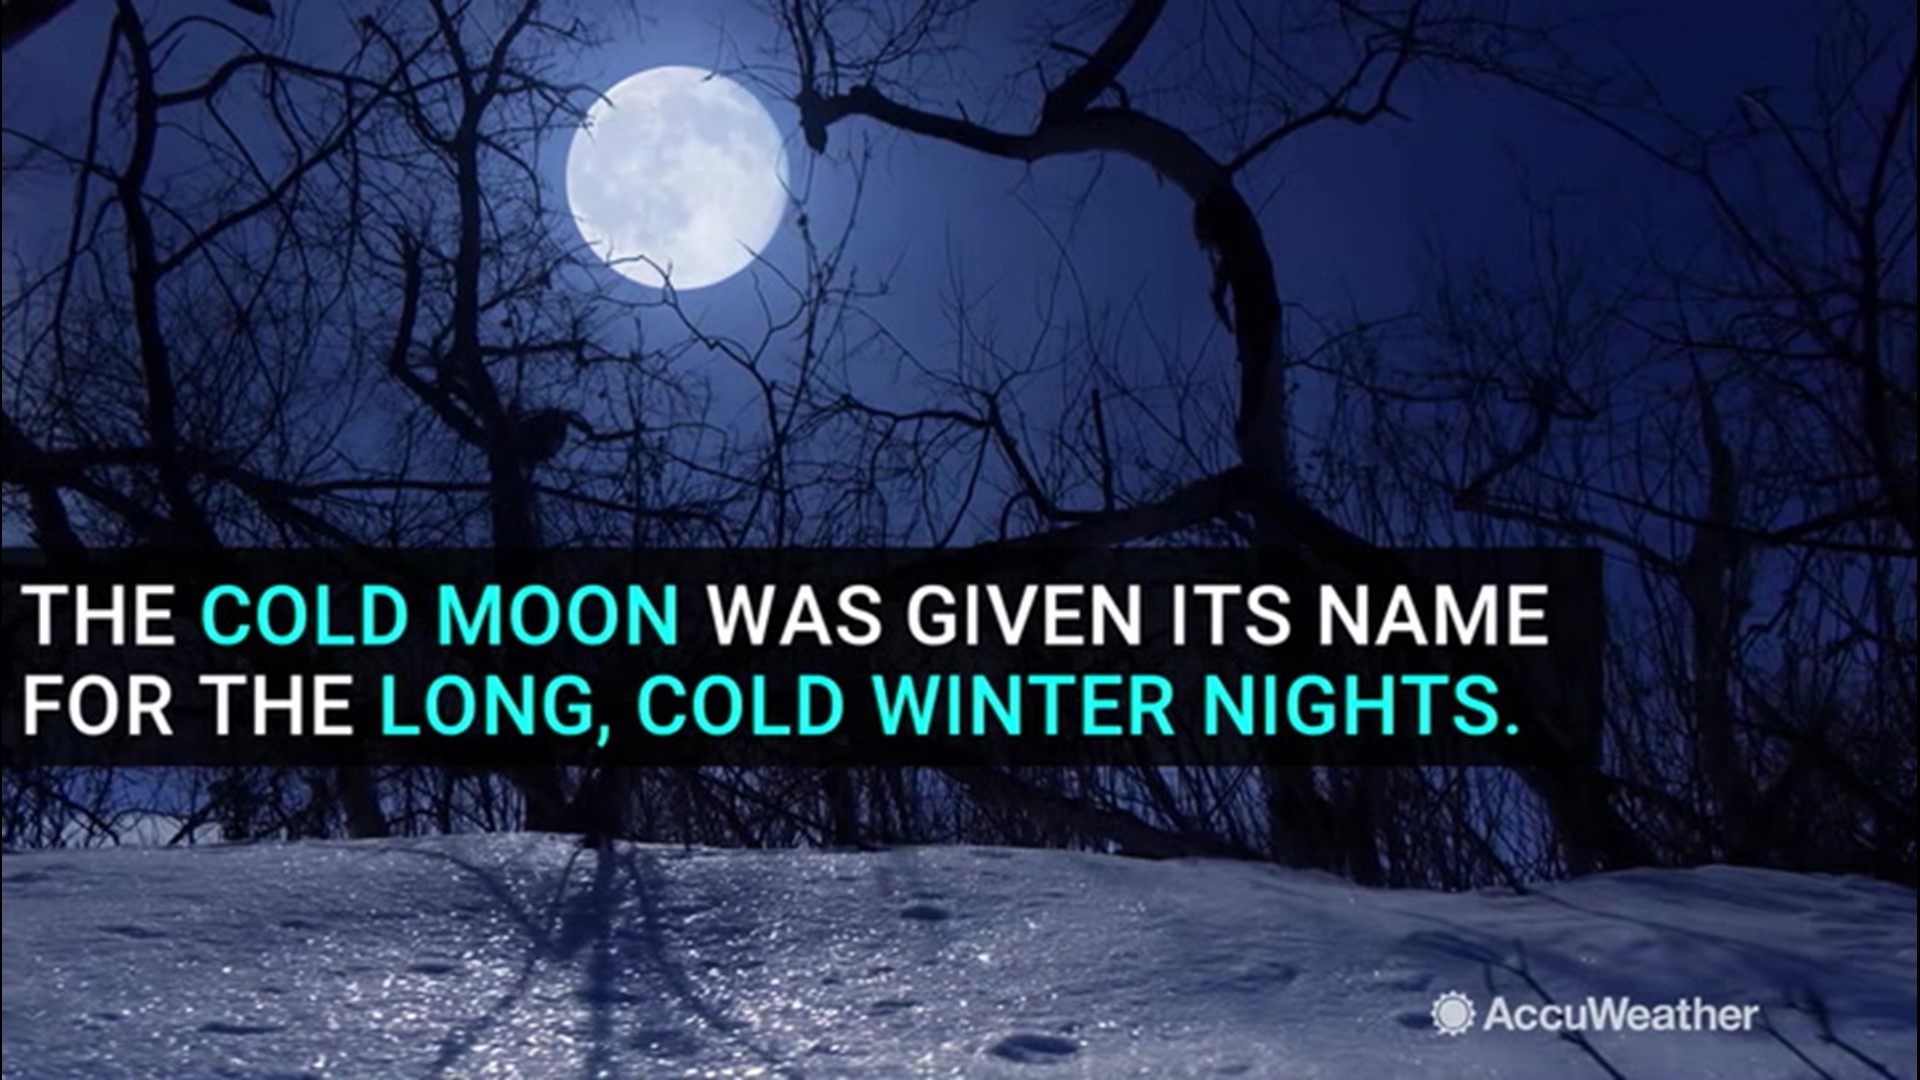 Why is December's full moon known as the Cold Moon?